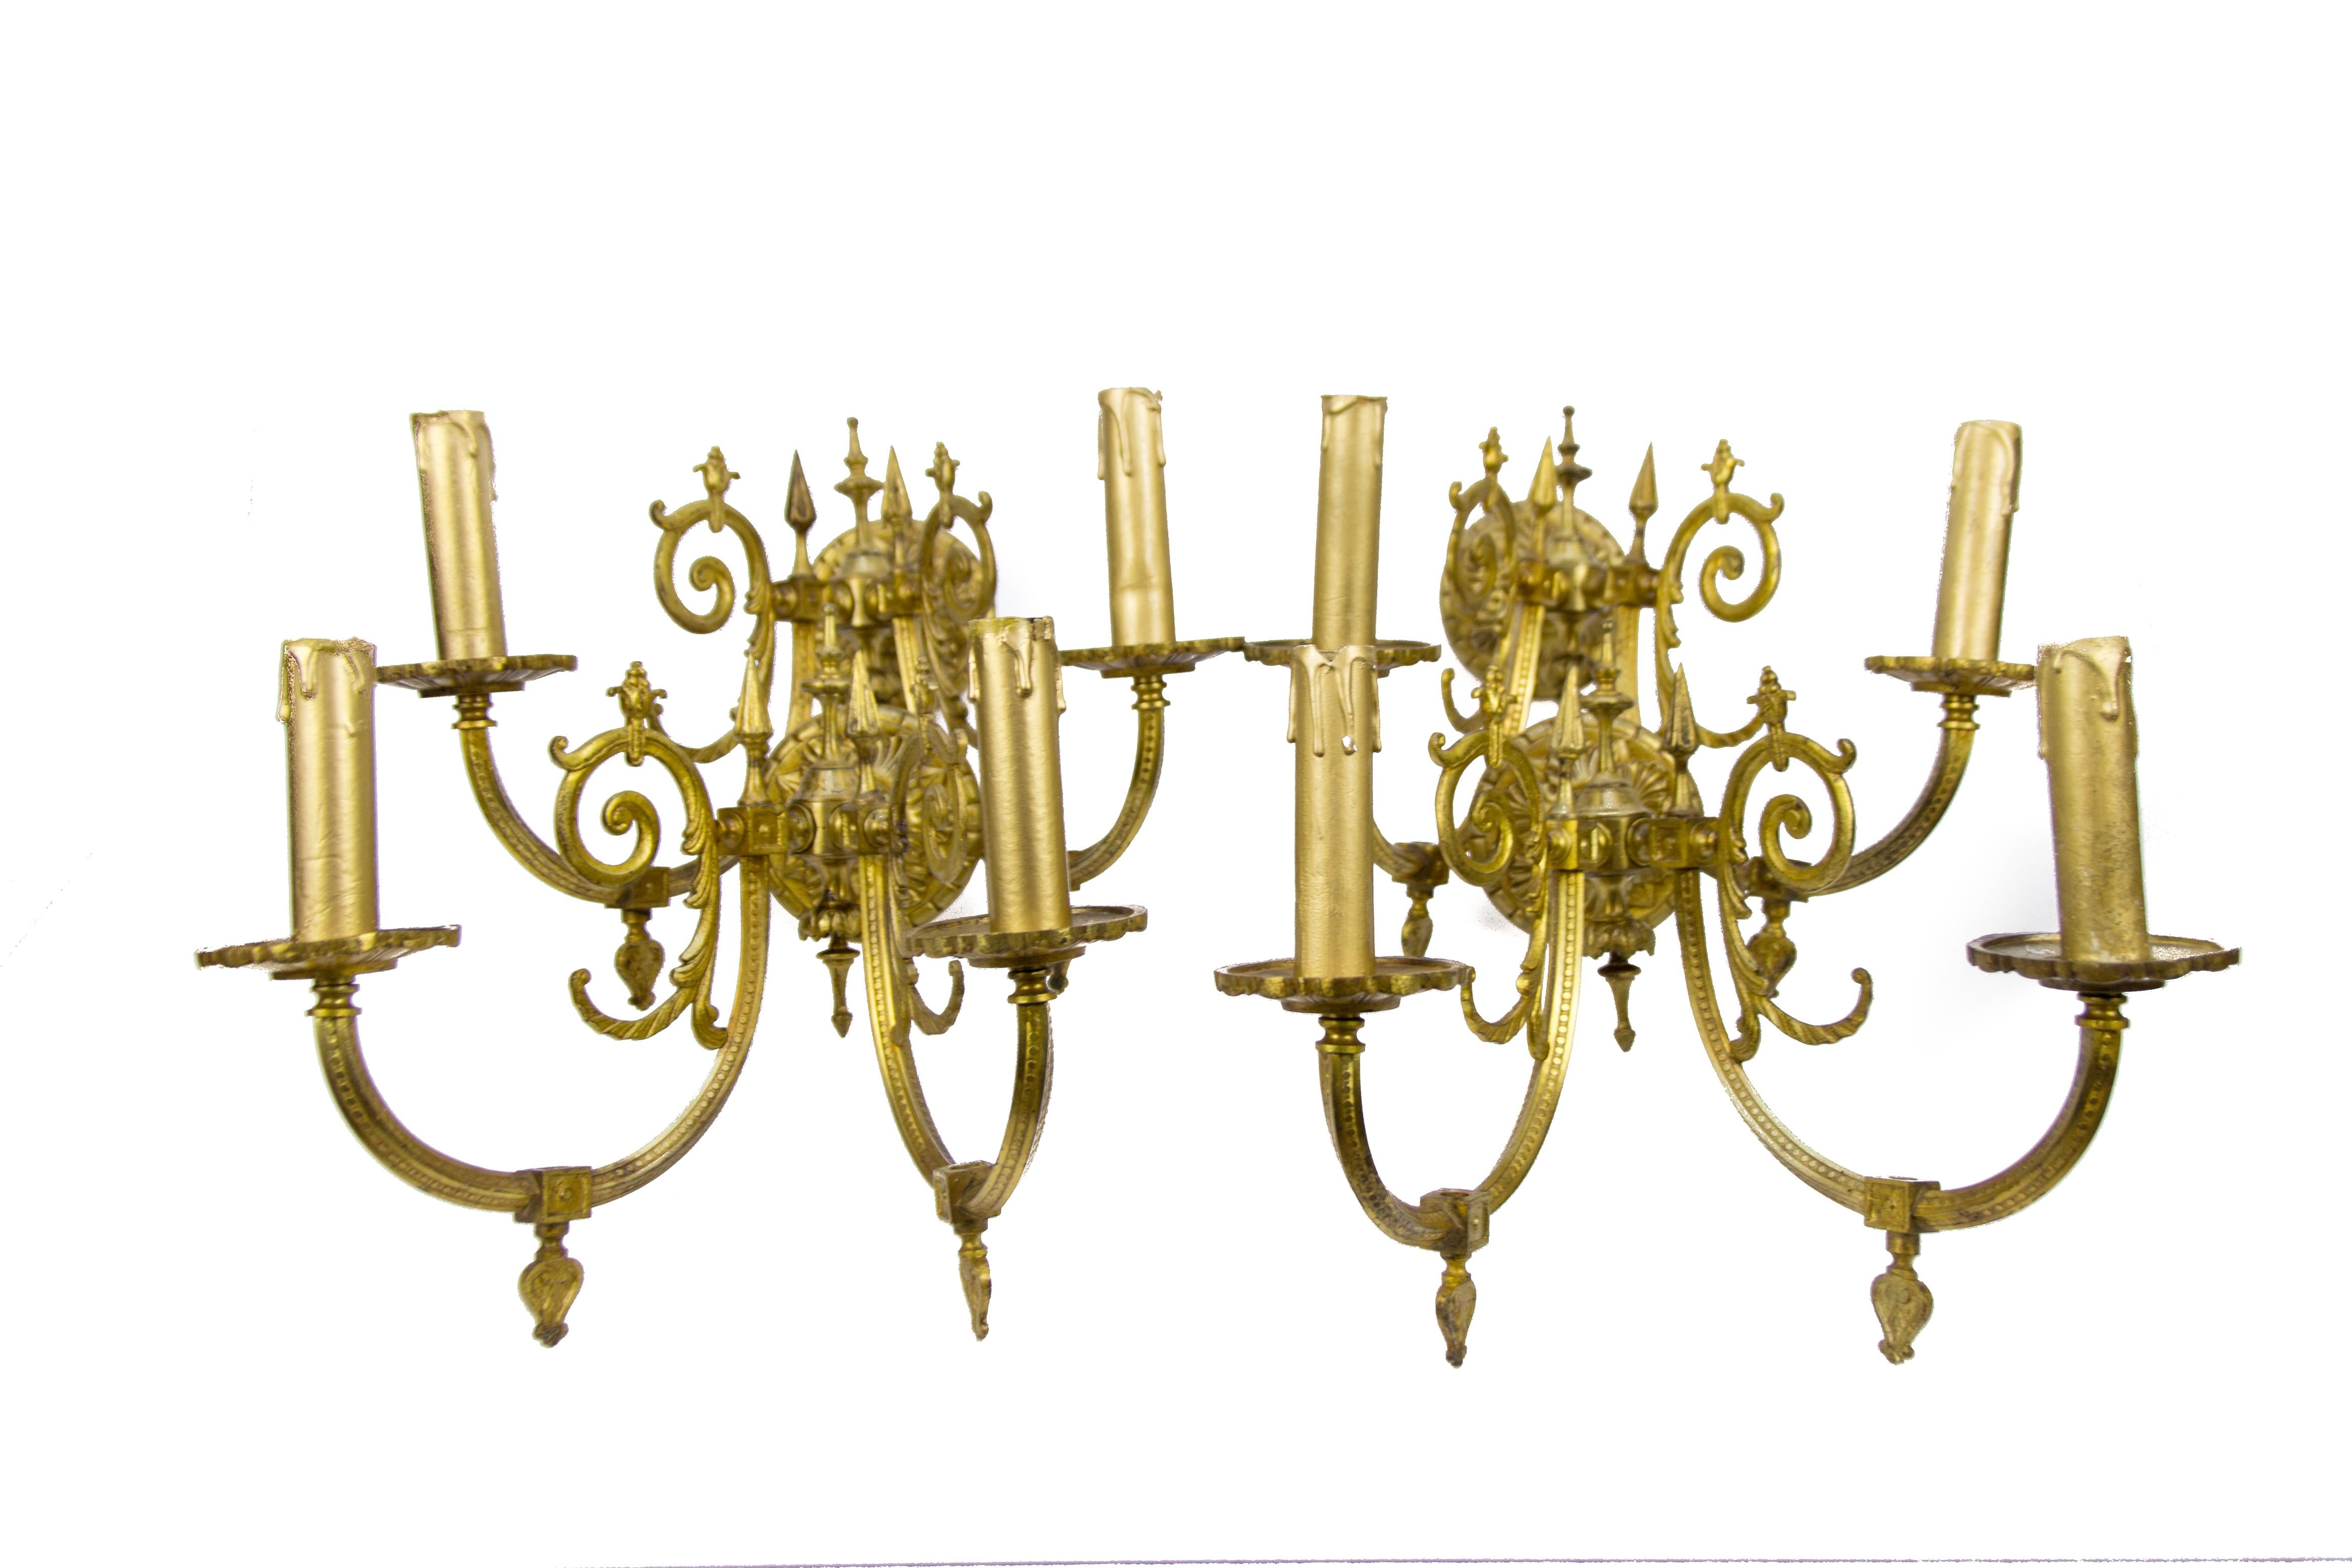 Set of four Victorian-style bronze electrified (gas converted to electric) wall sconces from the late 19th century. Each has two bronze arms and each arm has a socket for an E 14 size light bulb.